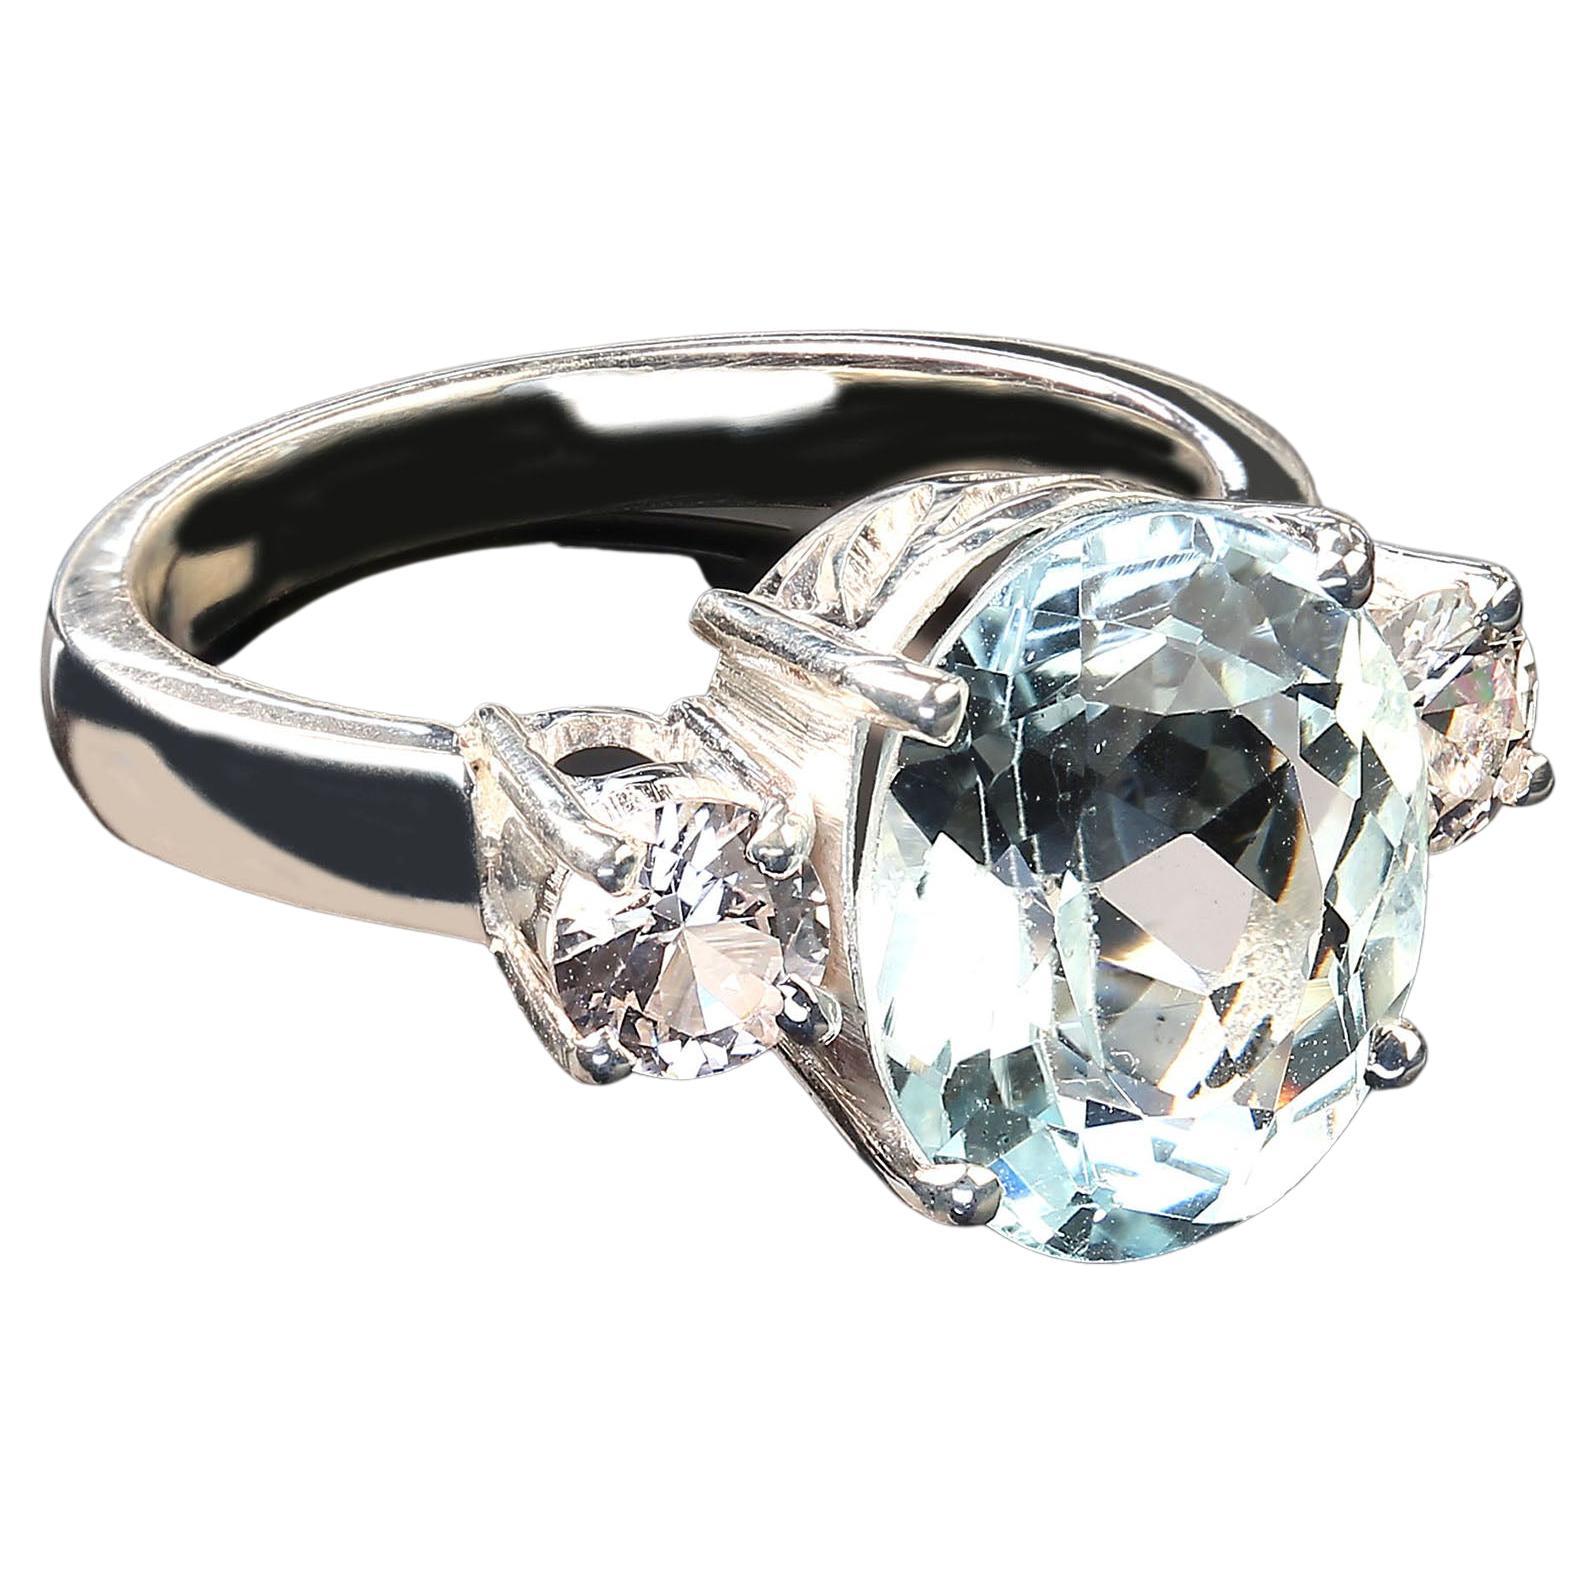 Glittering blue oval Aquamarine ring just waiting to grace your hand.  This gorgeous 5.31 carat beauty comes straight from one of our favorite Brazilian suppliers.  We have accented it with white Sapphires(0.82ct). These gemstones have been set in a